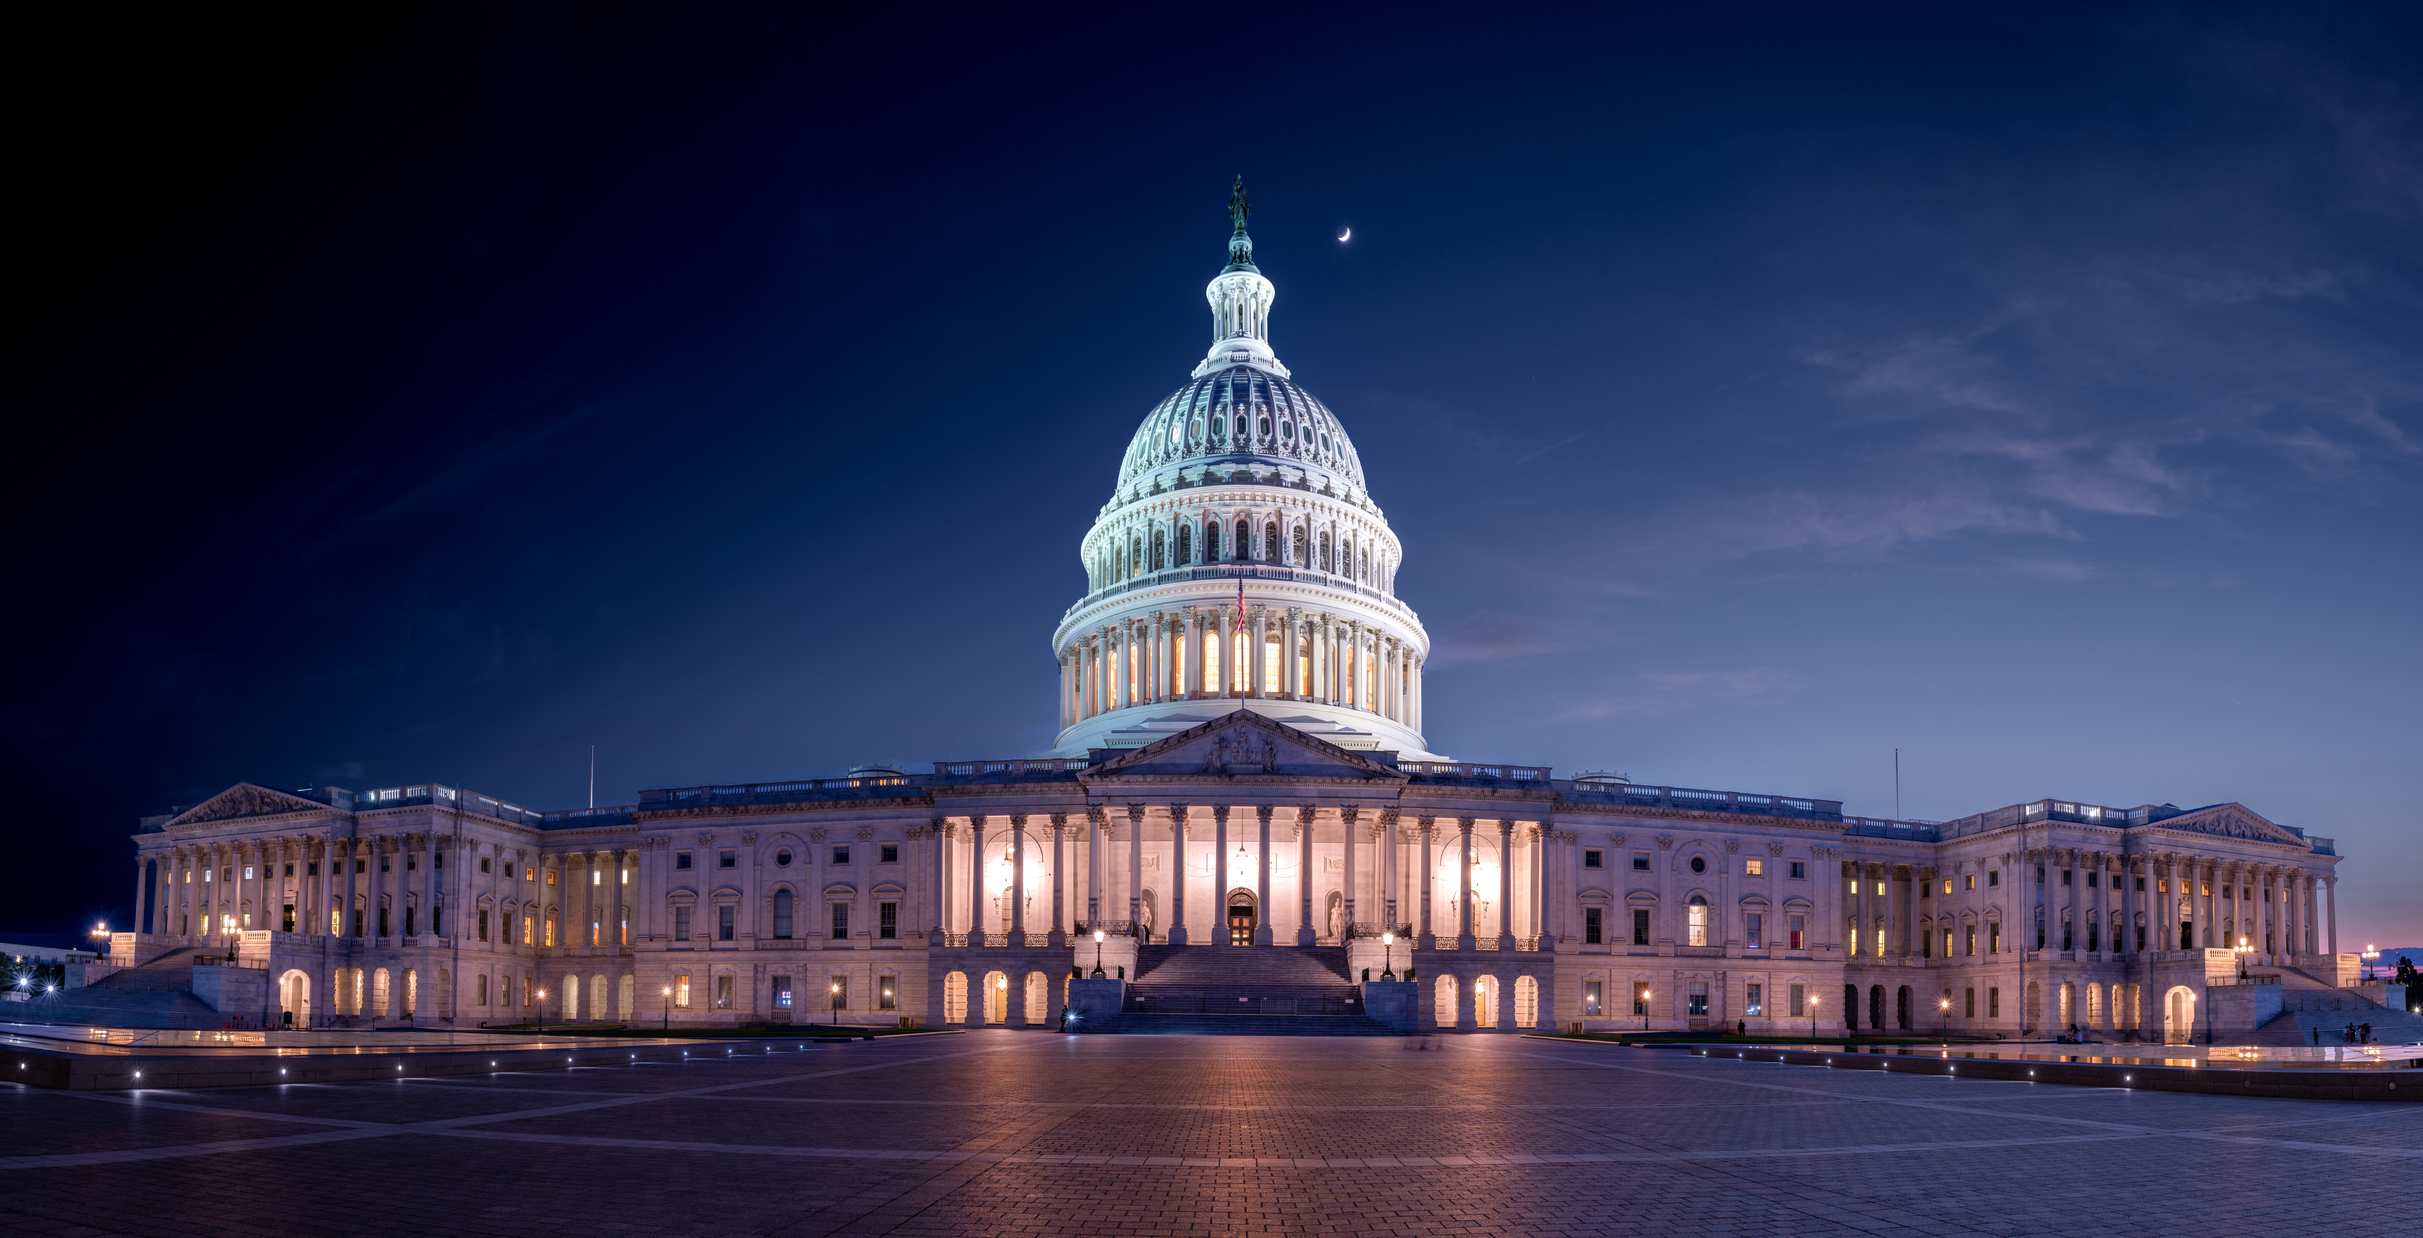 Panoramic view of the U.S. Capitol at night.